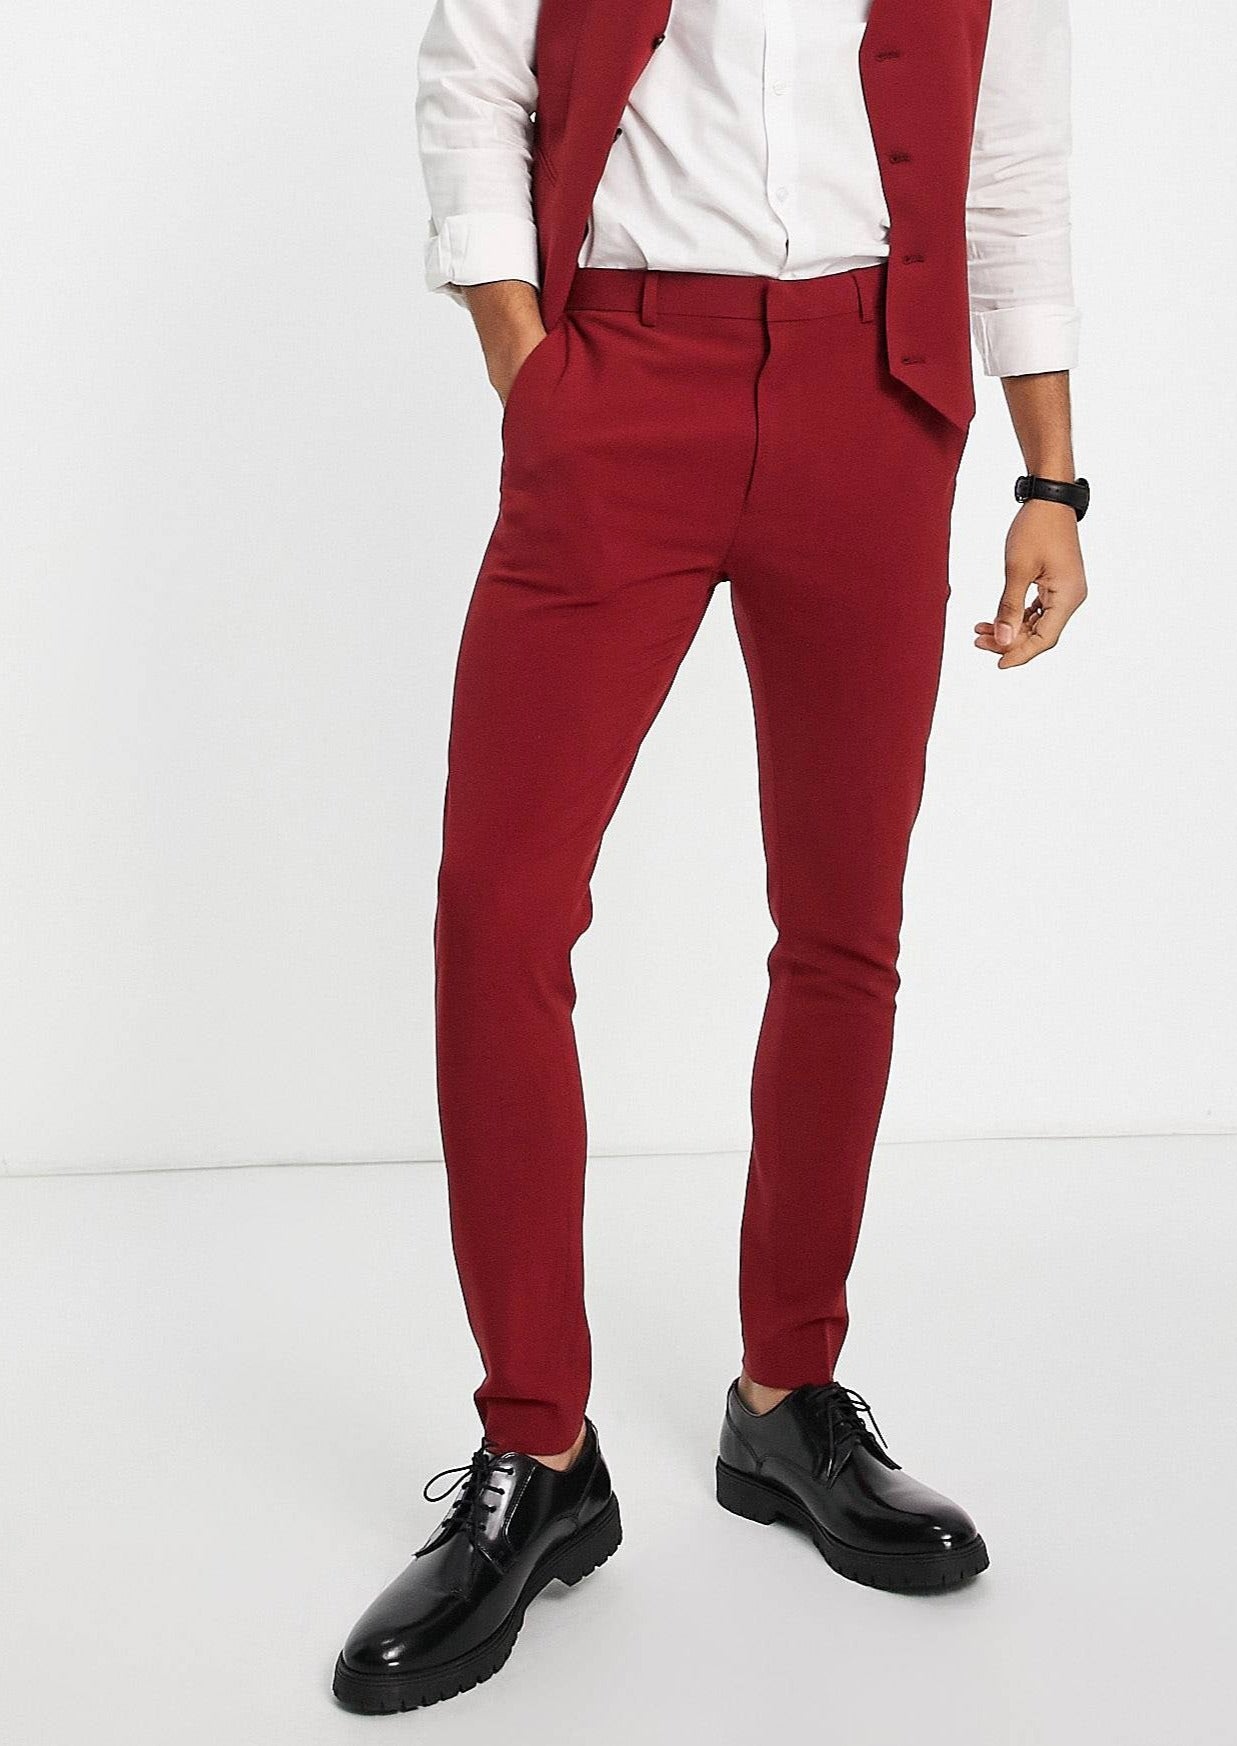 Buy Rr Blue Slim Fit FlatFront Trousers  Red Color Men  AJIO LUXE